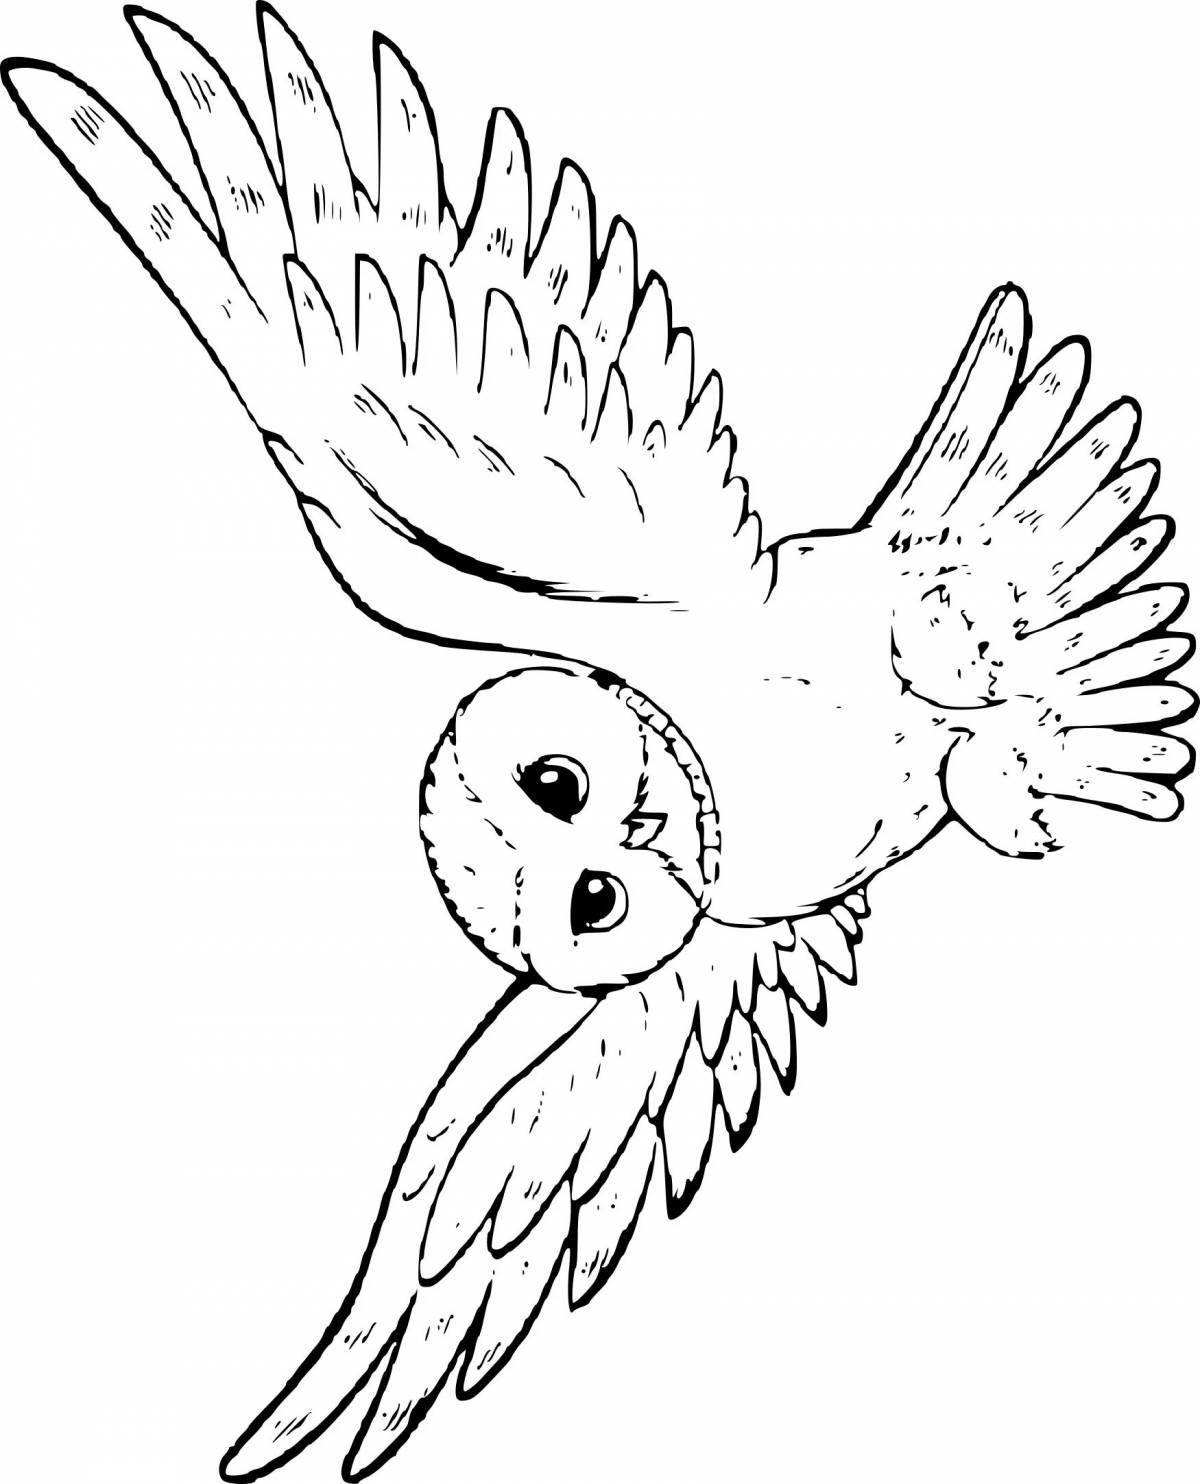 Harry Potter Hedwig majestic coloring book